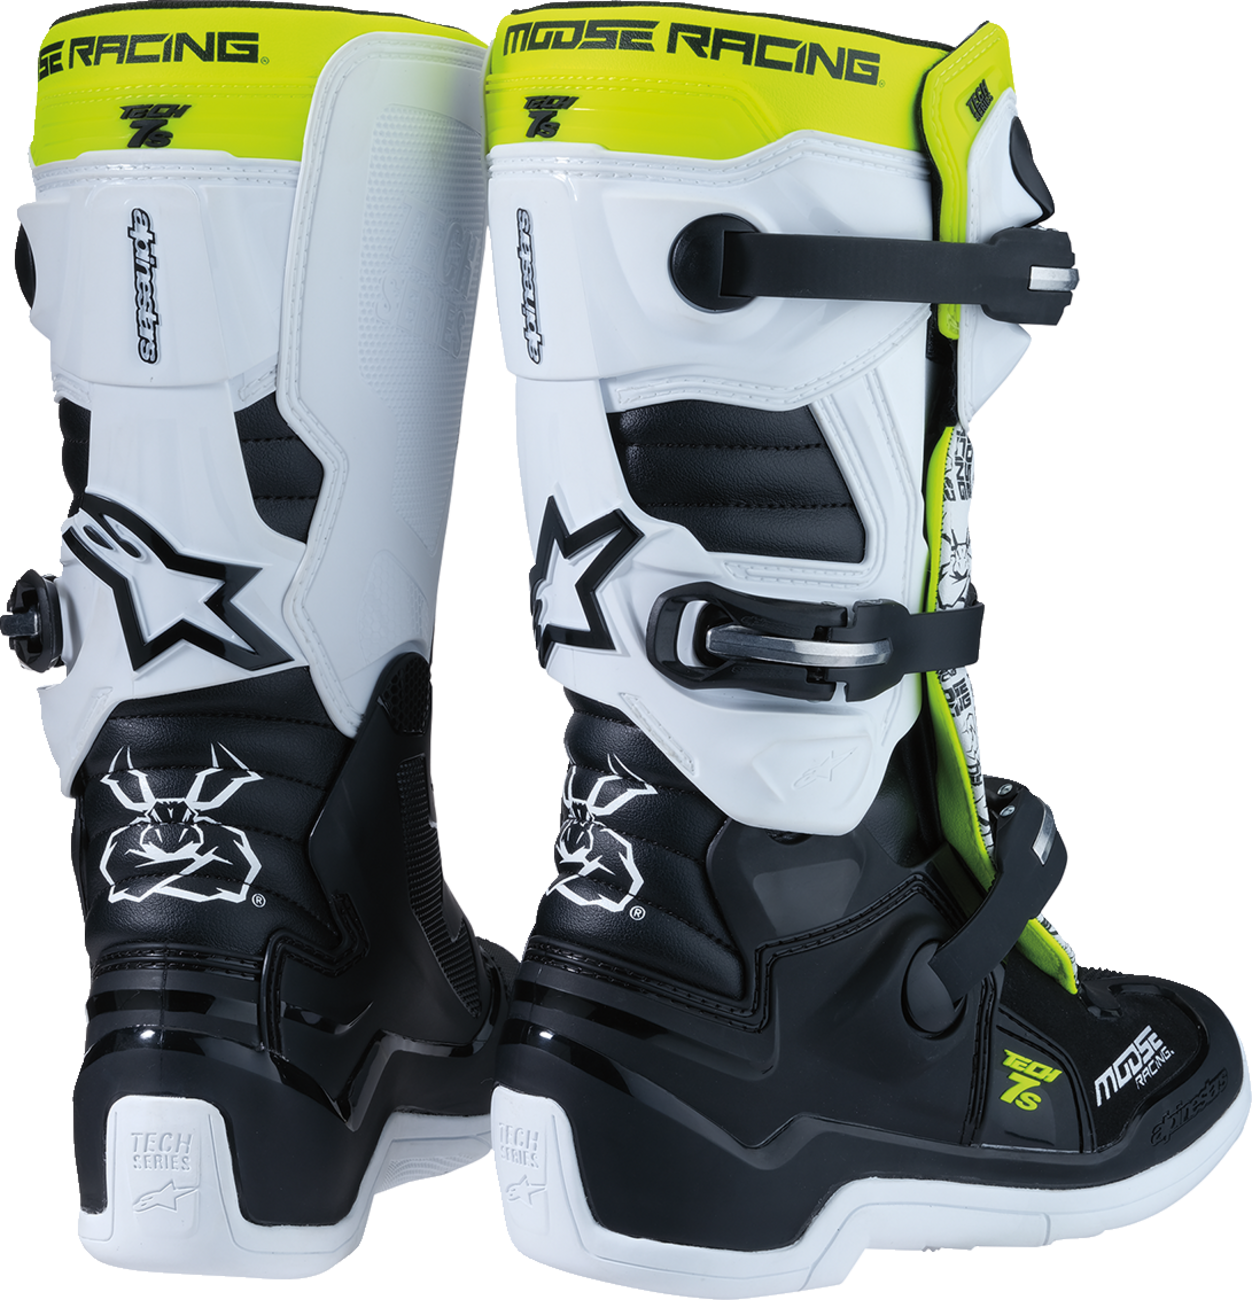 MOOSE RACING Youth Tech 7S Boots - Black/White/Yellow - US 4 0215024-125-4